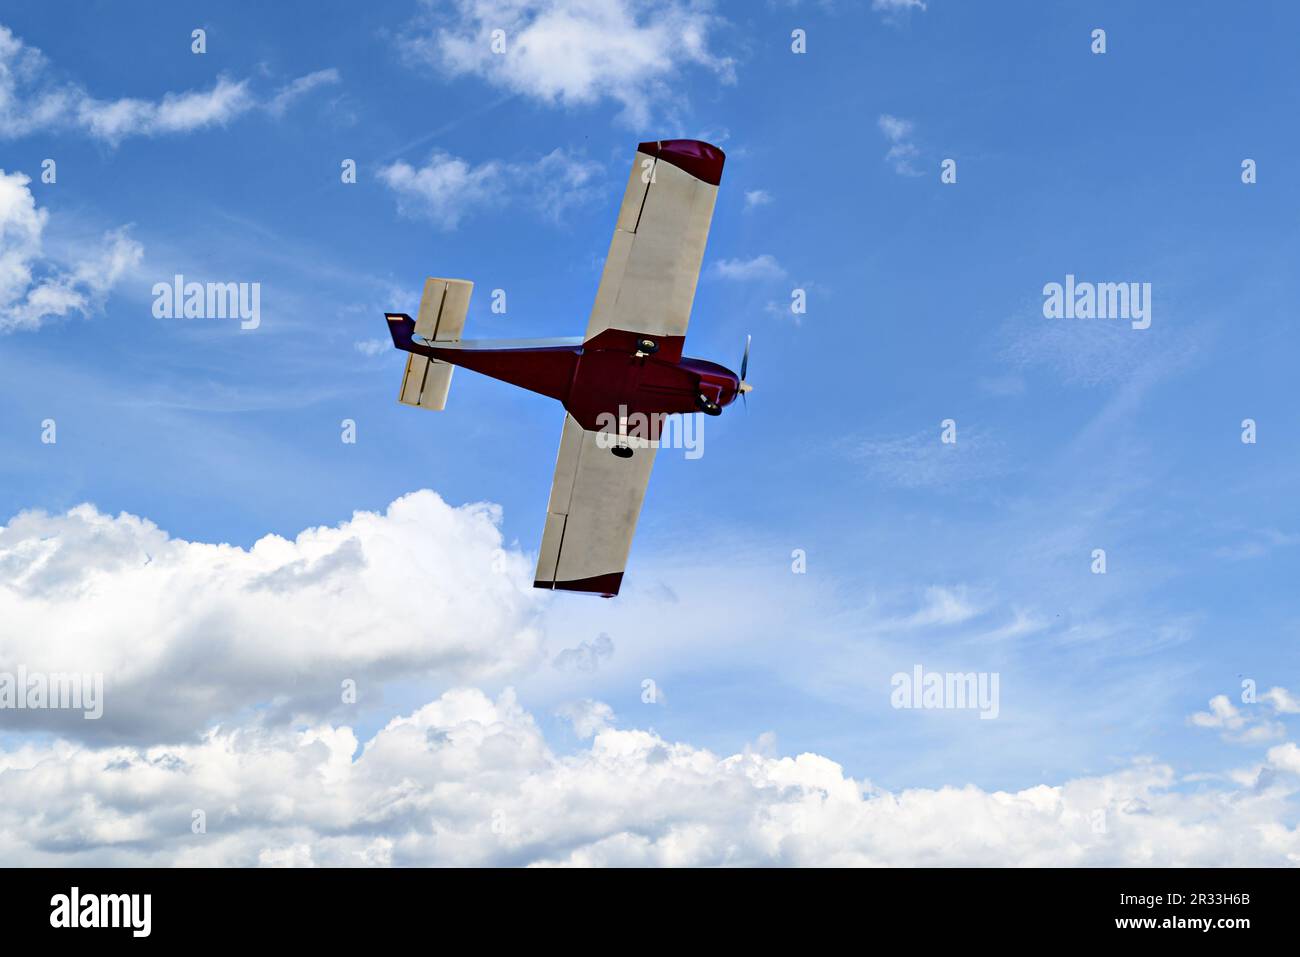 Single engine ultralight plane flying in the blue sky with white clouds Stock Photo